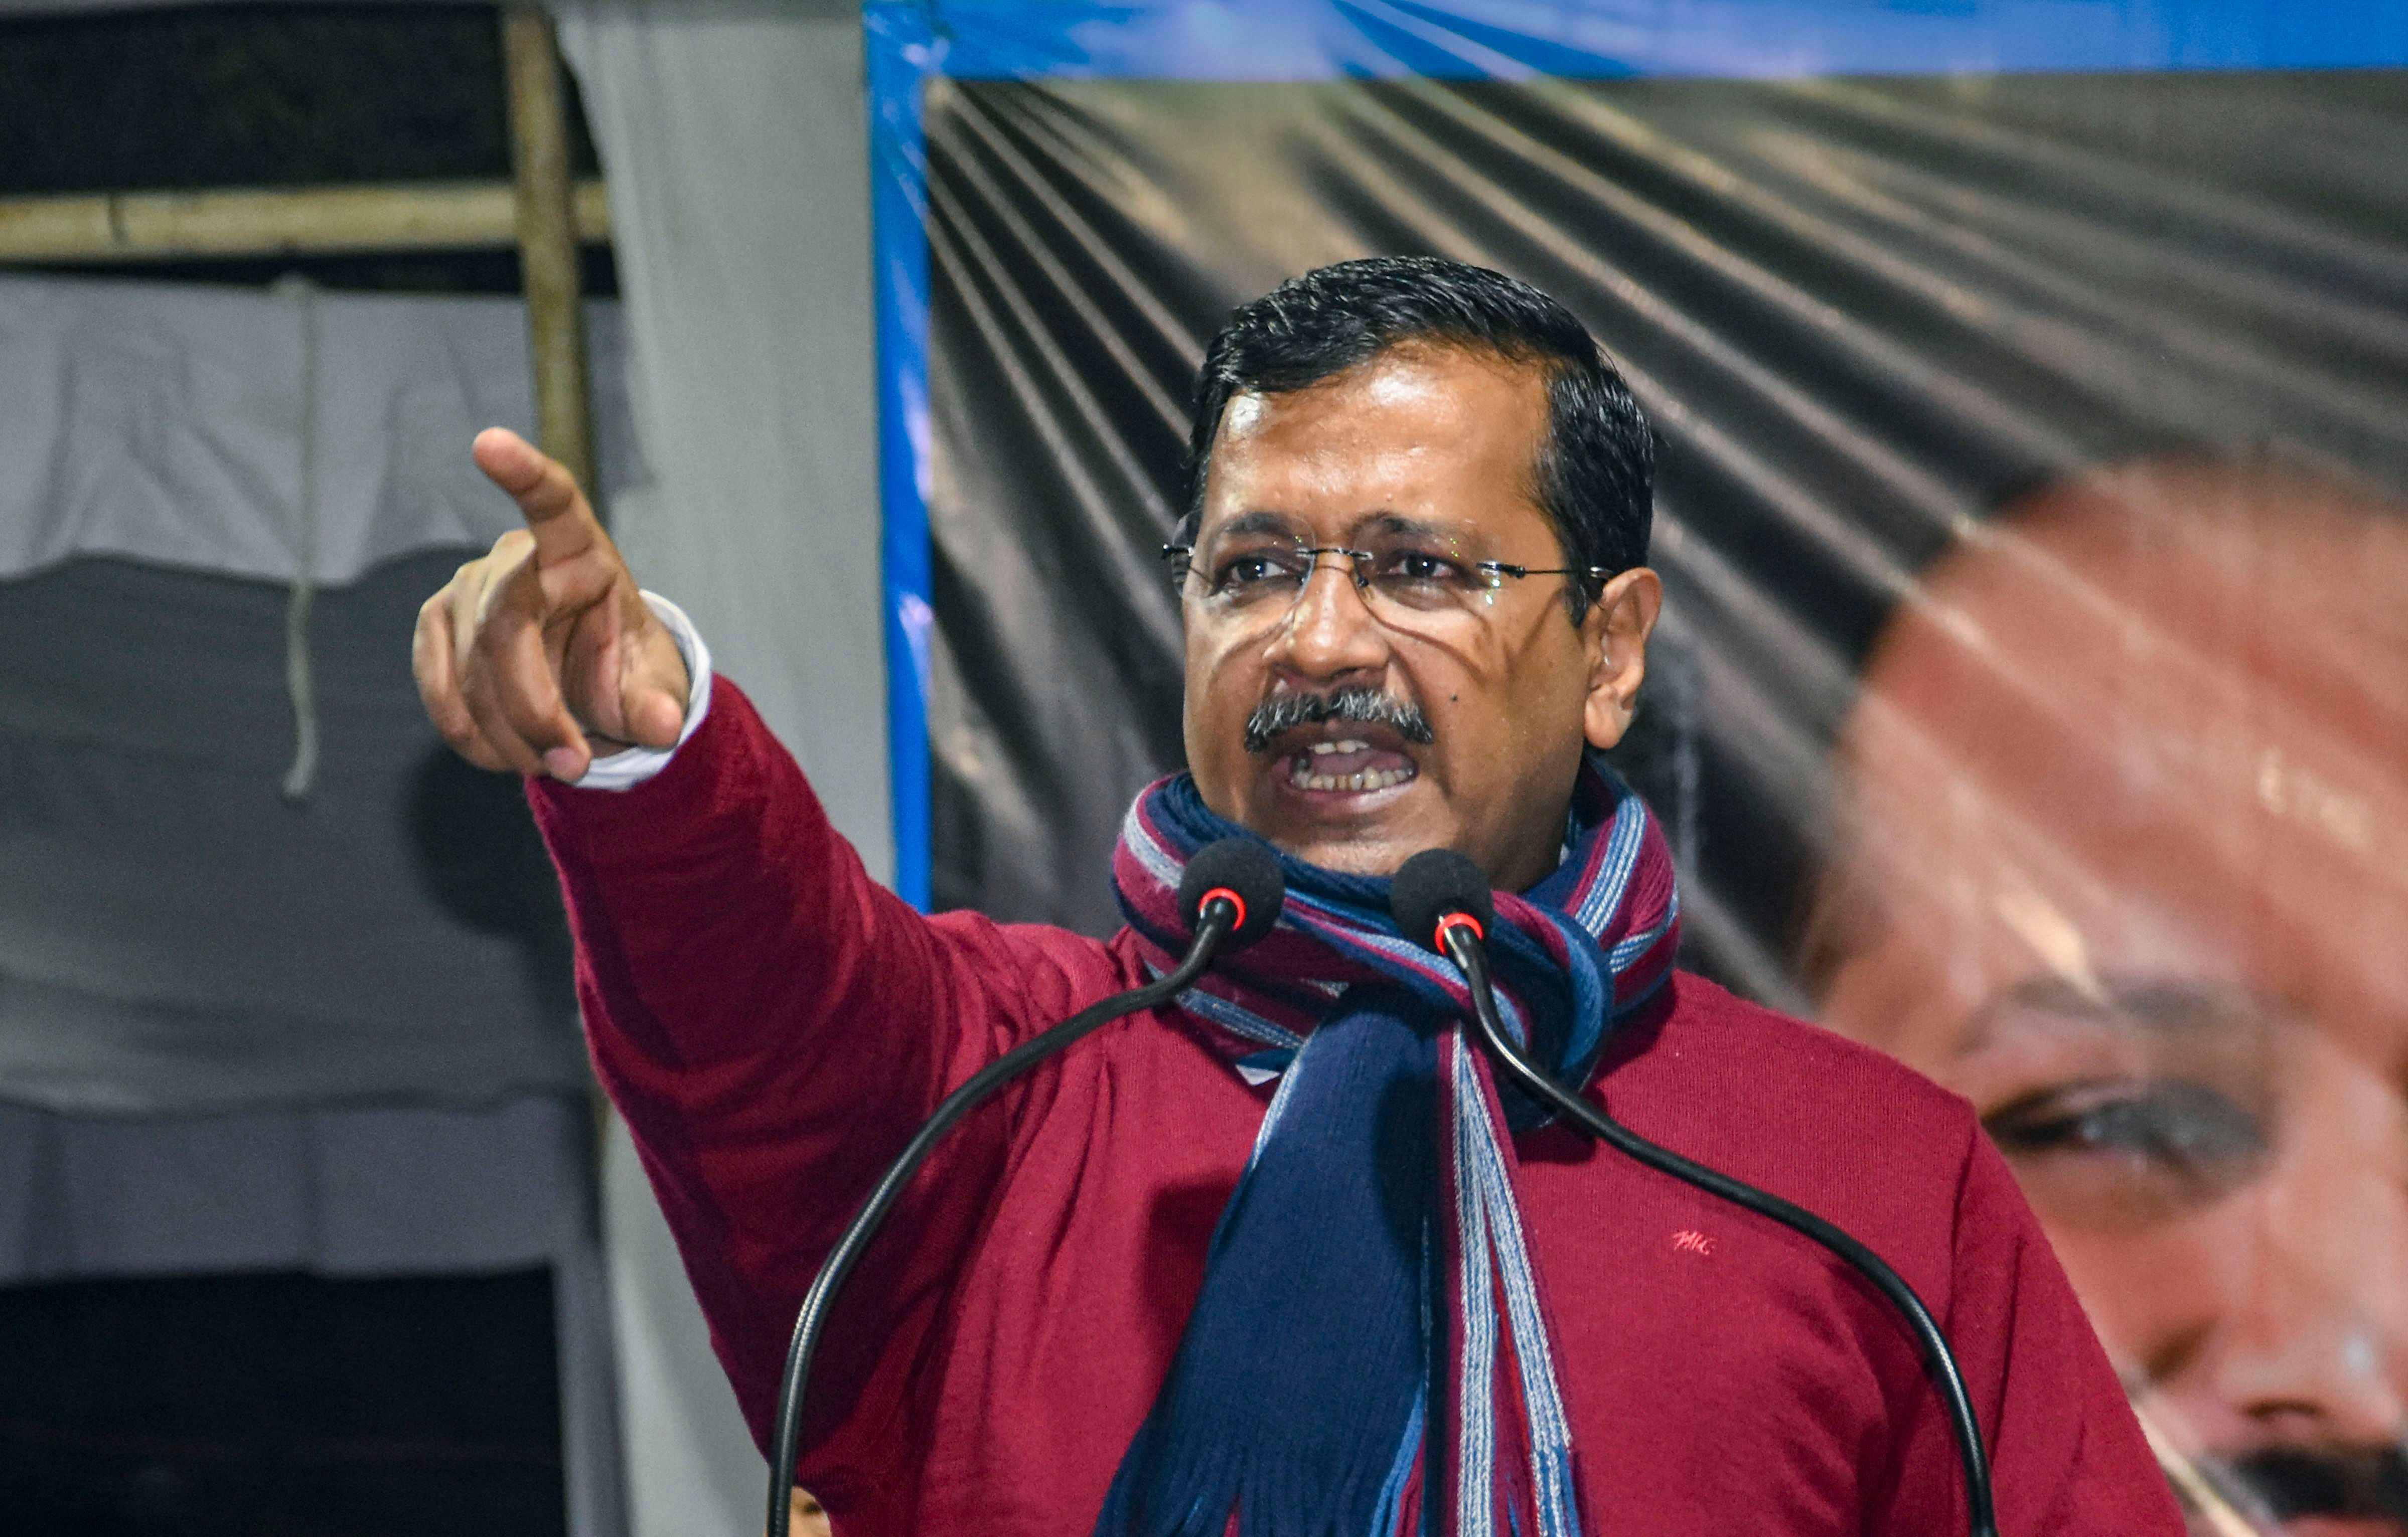 The ten guarantees included uninterrupted power and water supply, world-class education facility, affordable and accessible healthcare, cheapest transport system and pollution-free Delhi among others. (Credit: PTI Photo)